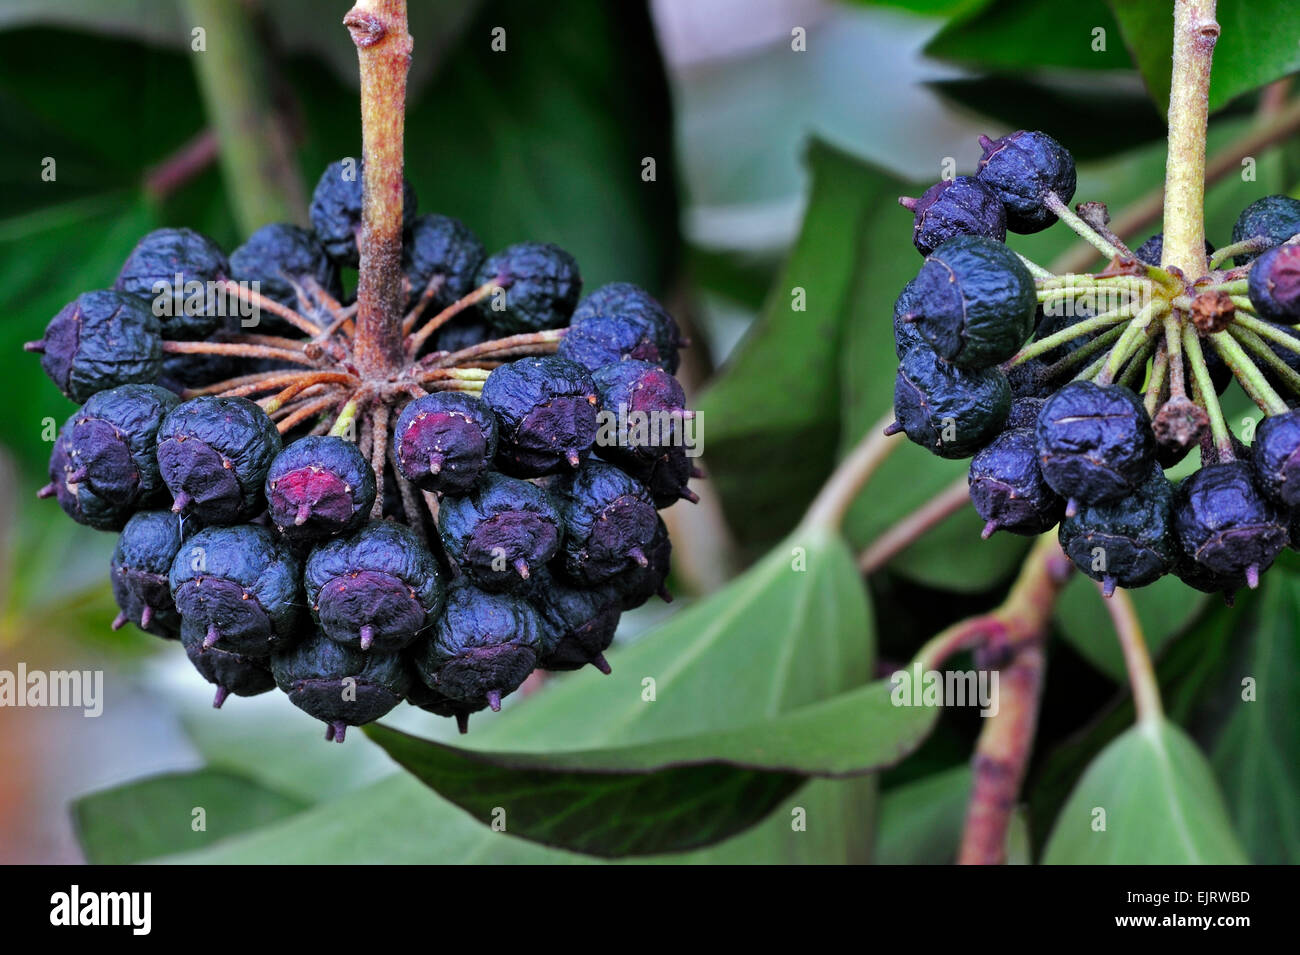 Lierre (Hedera helix) close up of berries Banque D'Images